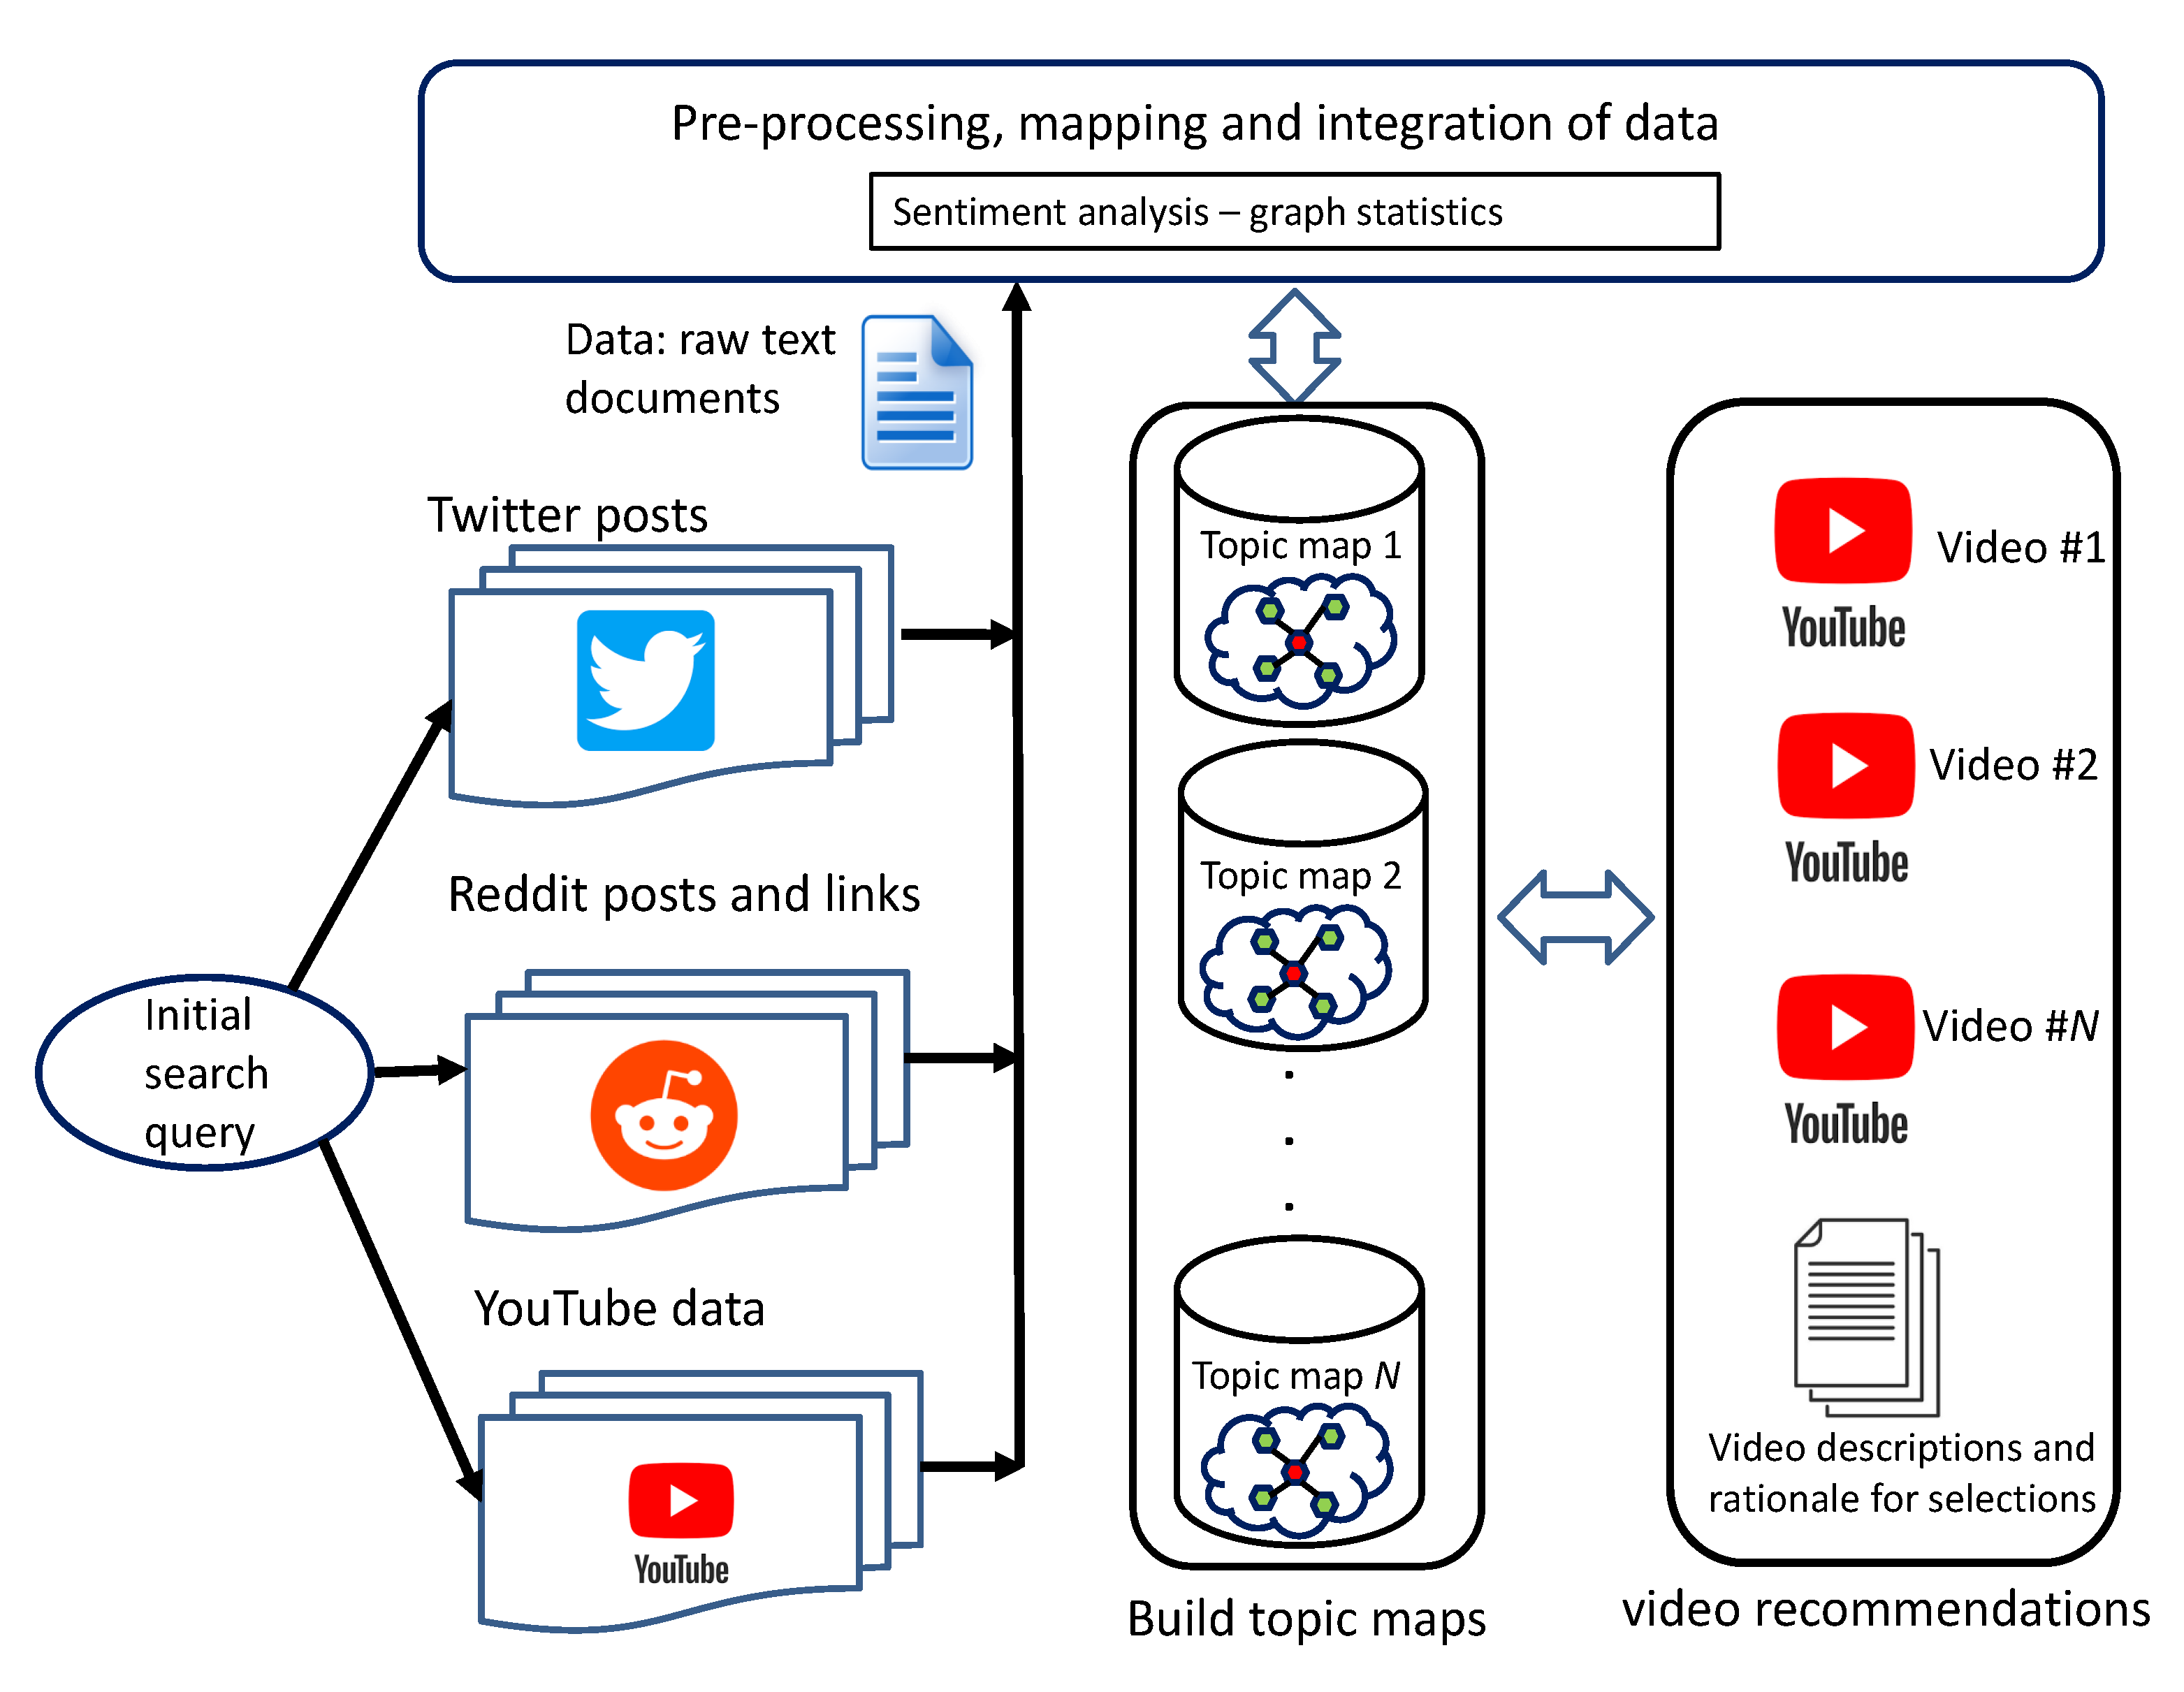 Information Free Full-Text Analyzing Social Media Data Using Sentiment Mining and Bigram Analysis for the Recommendation of YouTube Videos